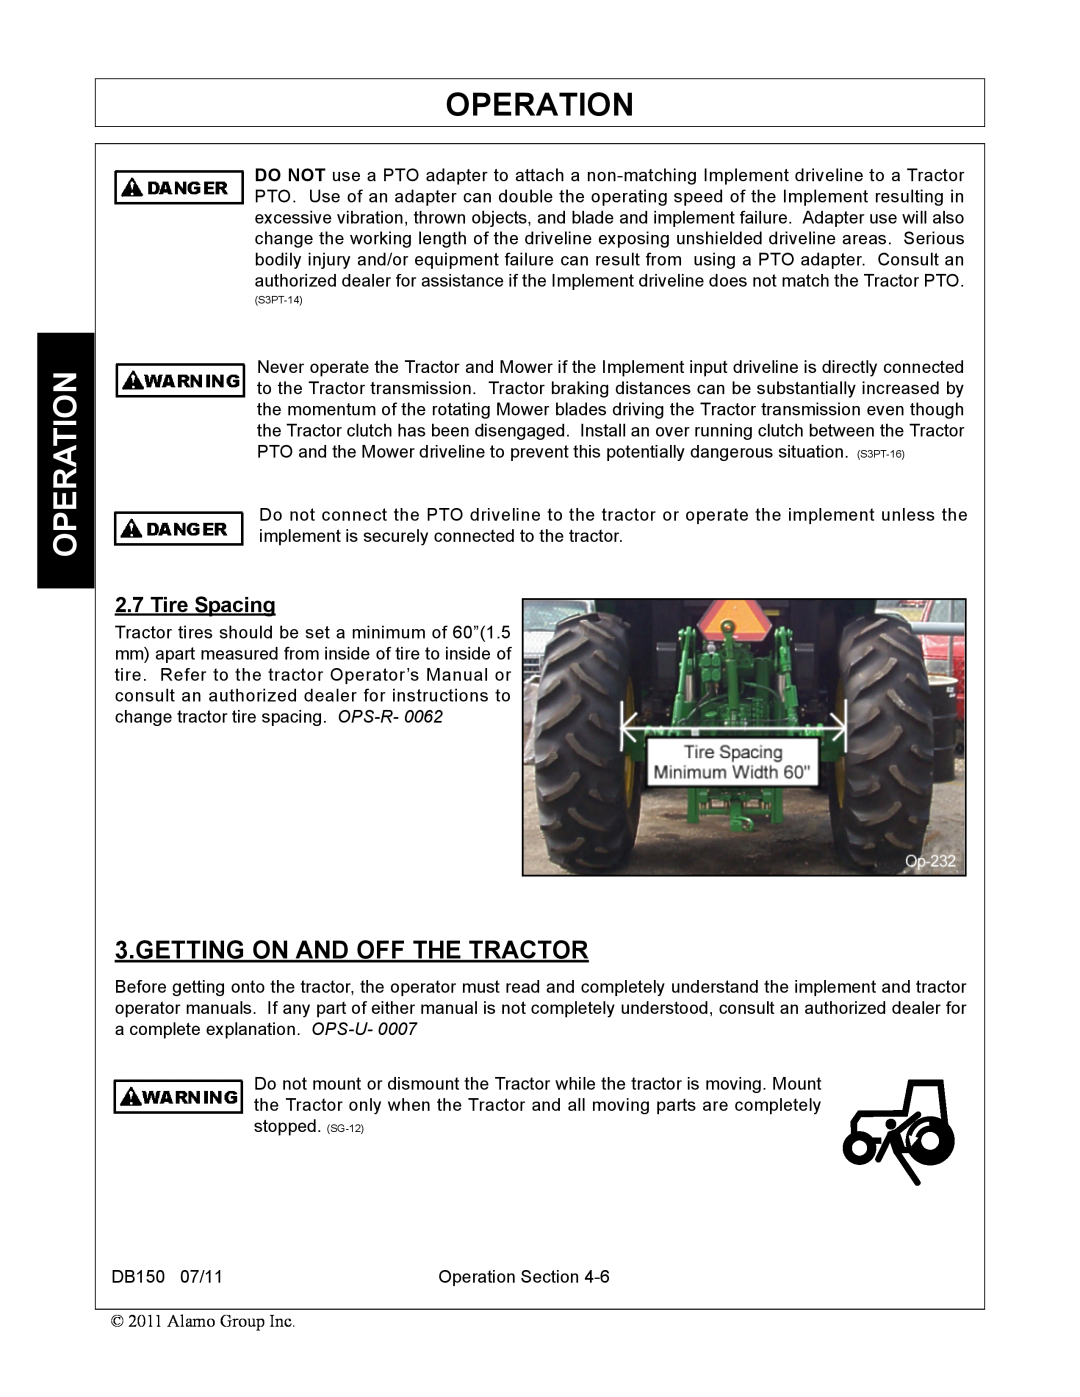 Rhino Mounts DB150 manual Getting On And Off The Tractor, Operation, Tire Spacing 